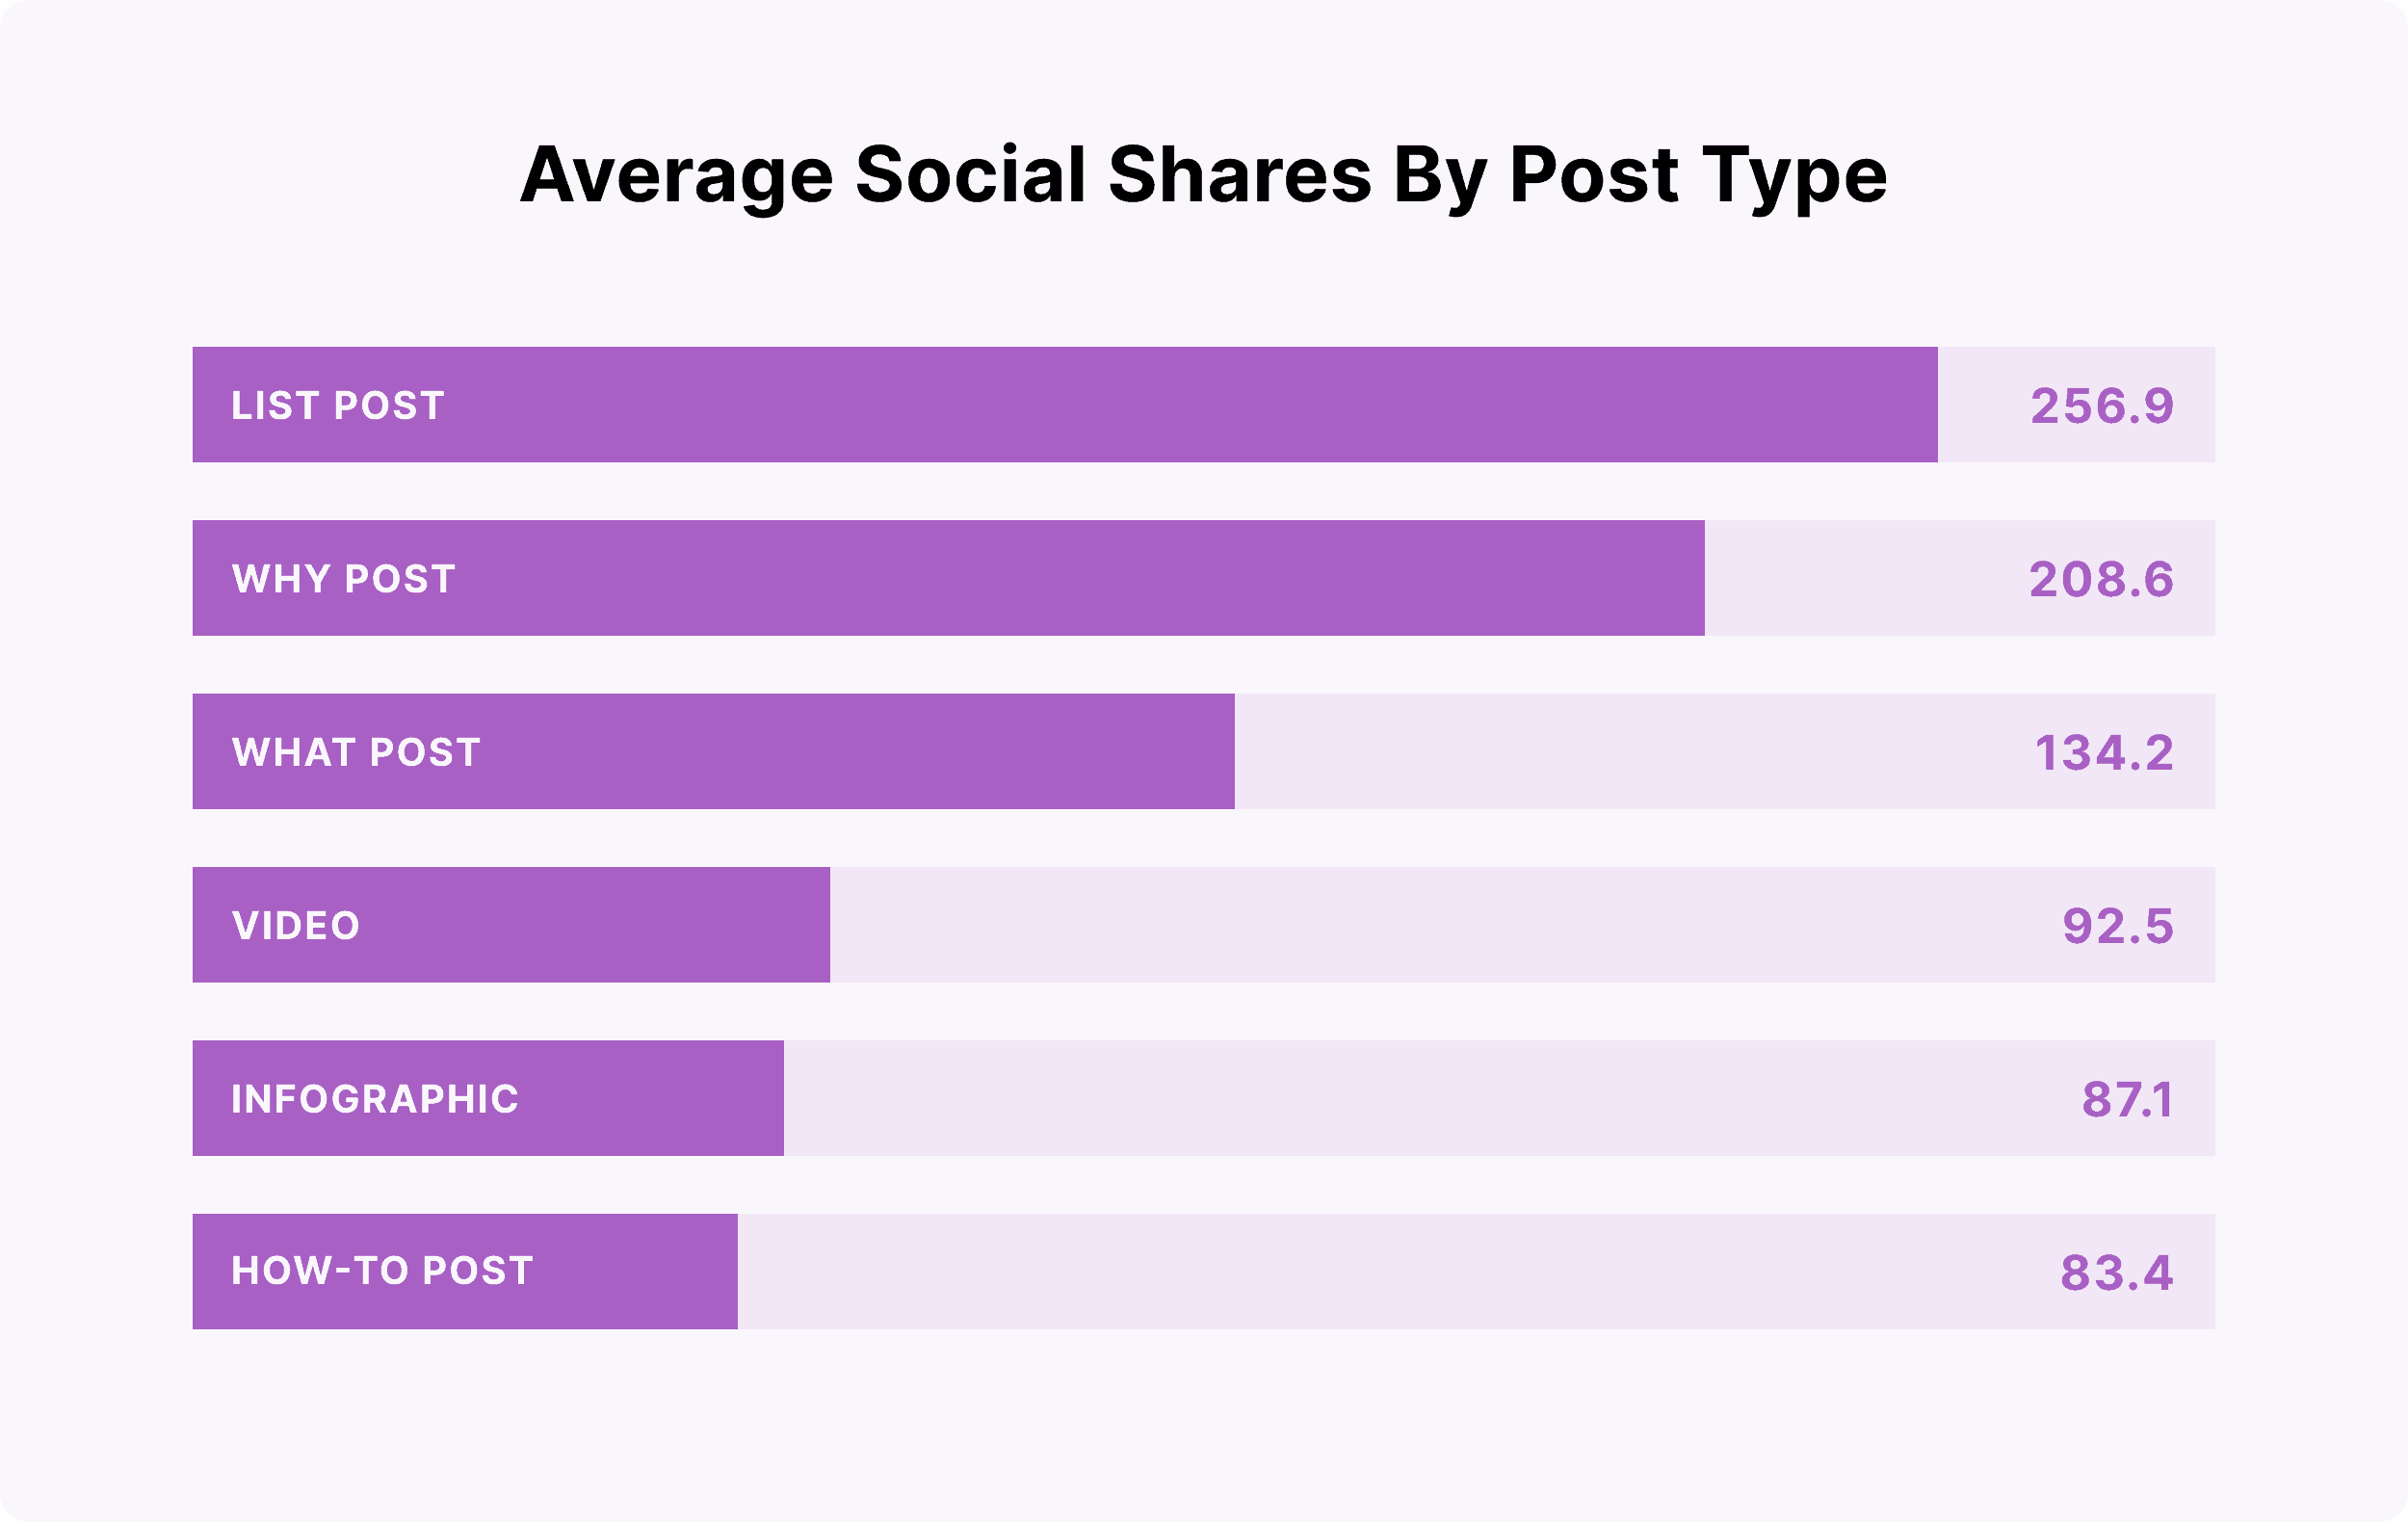 Average social shares by post type